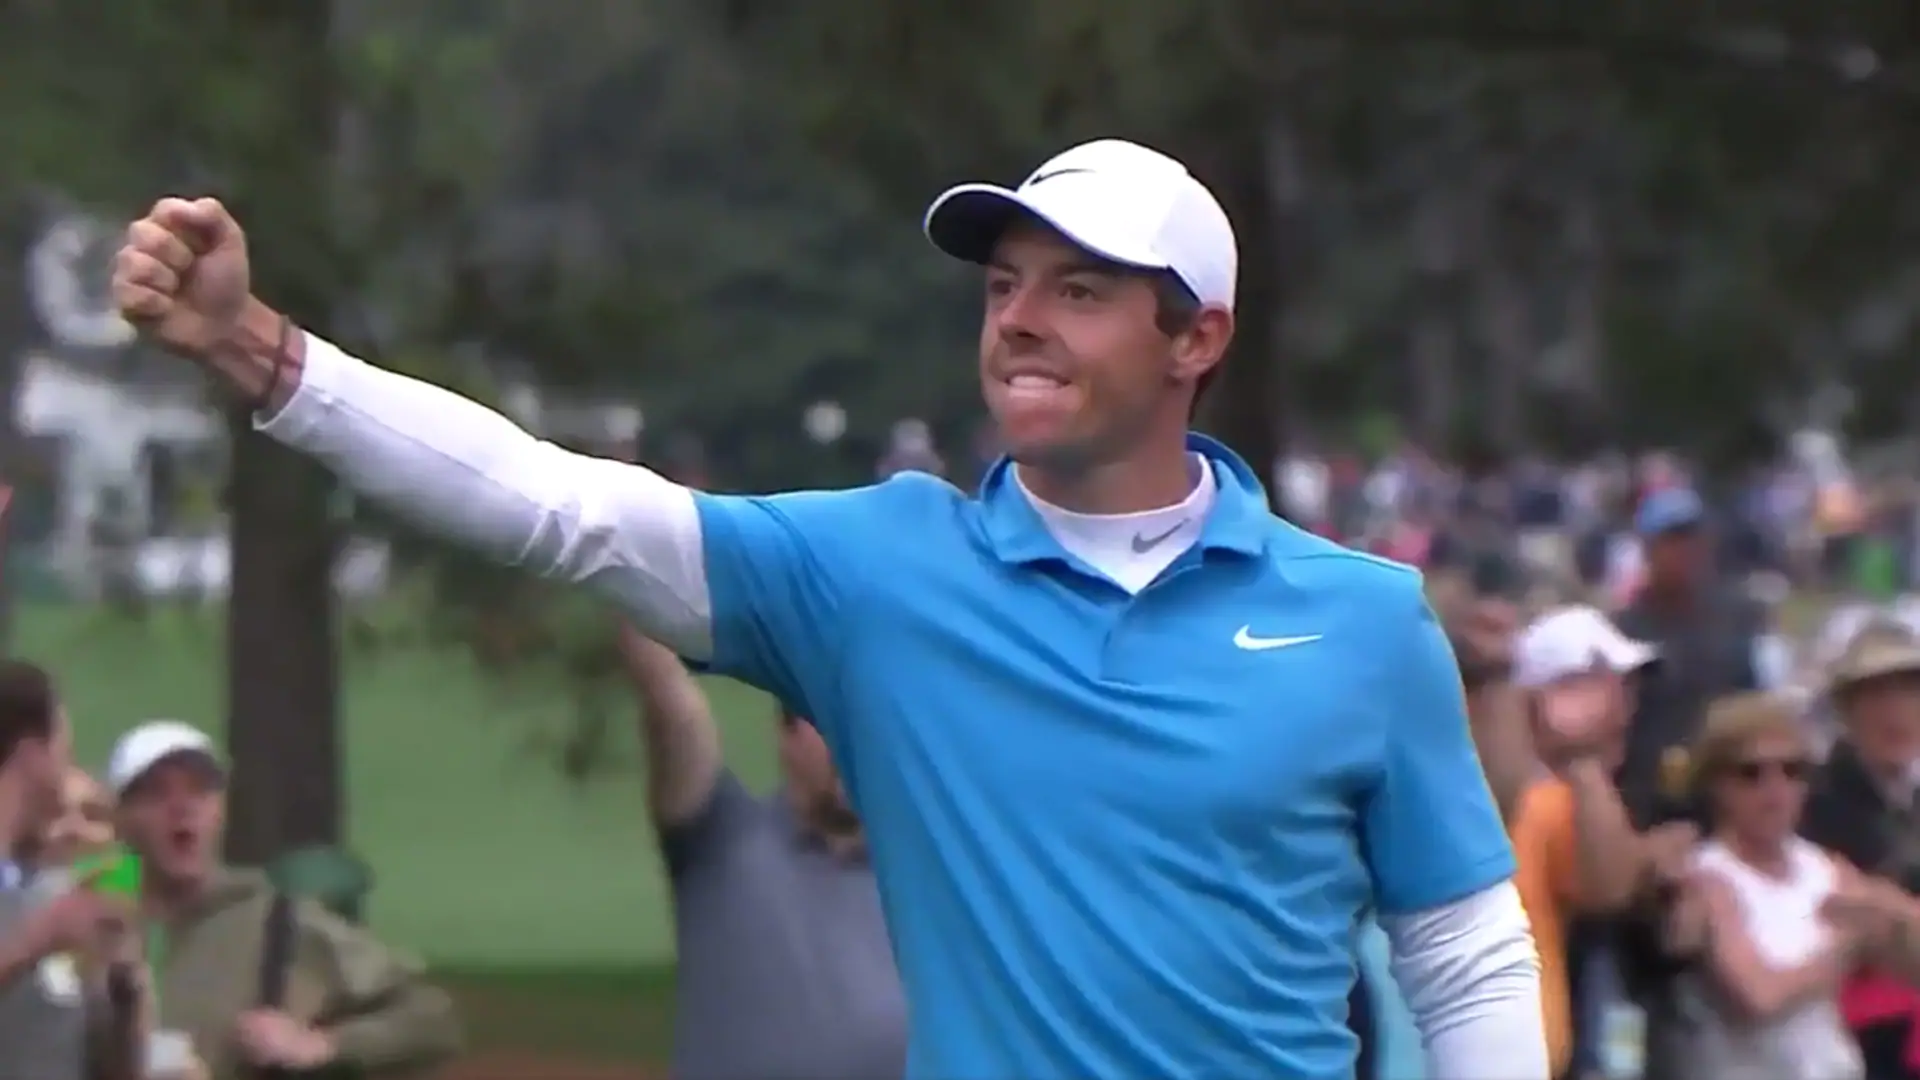 Watch: Rory chips in for eagle to tie lead